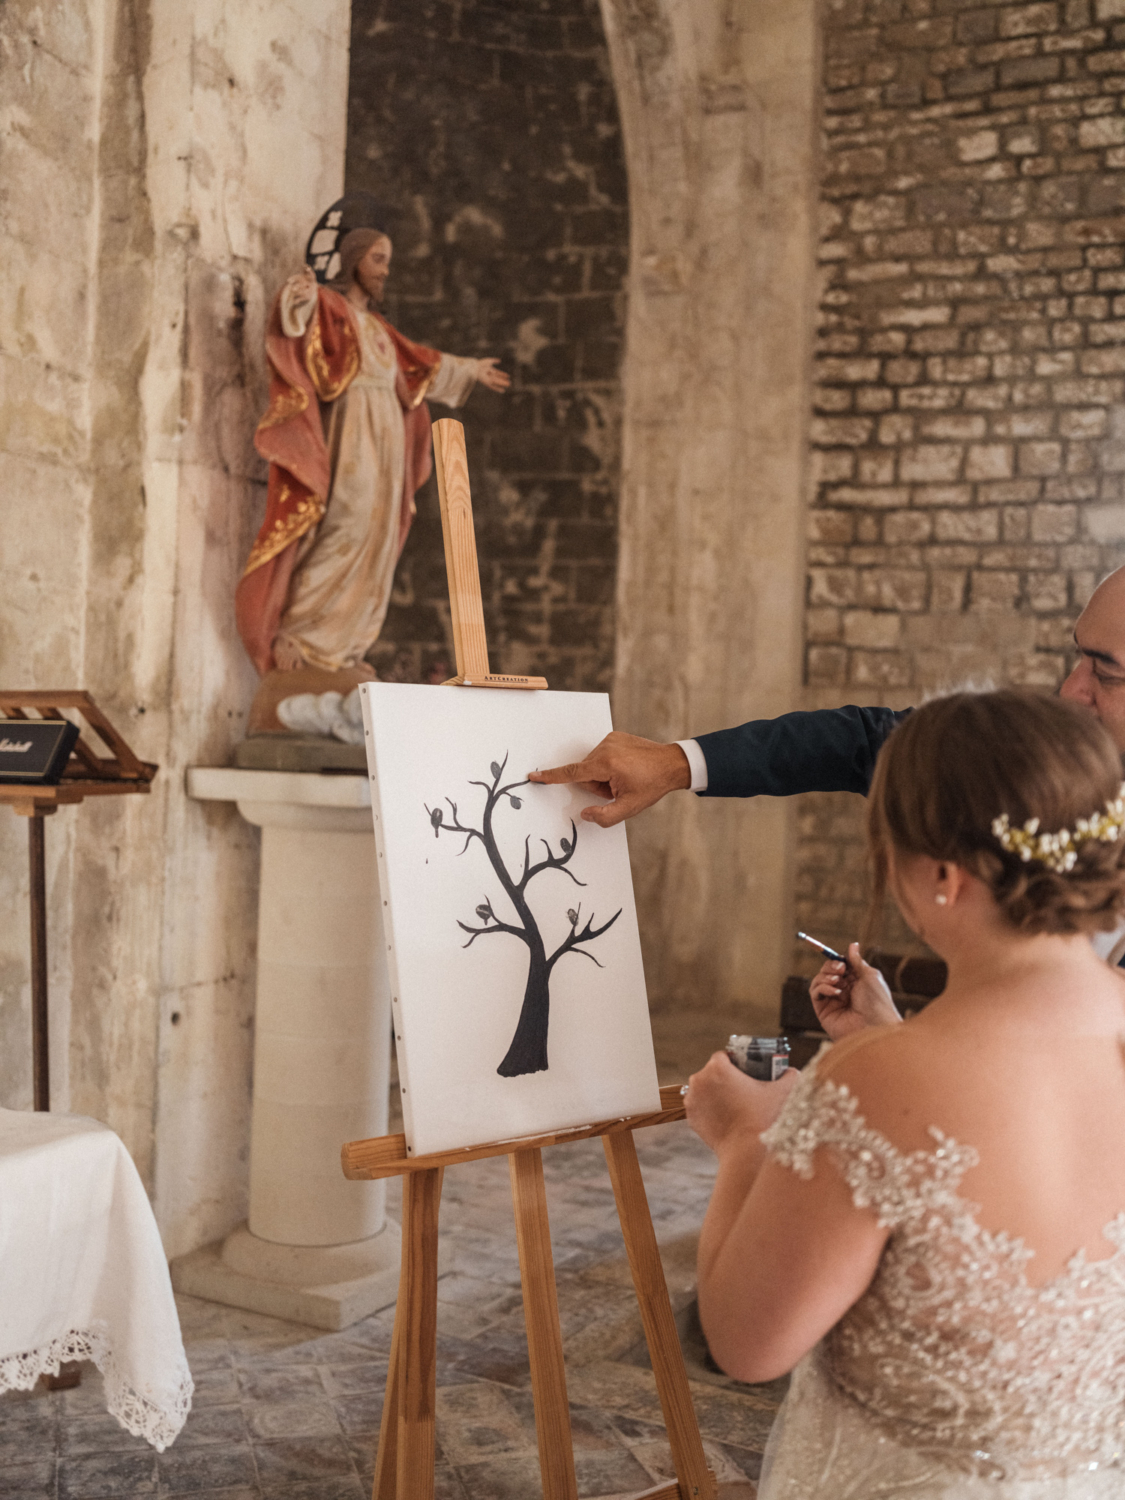 man points at ink painting on wedding day